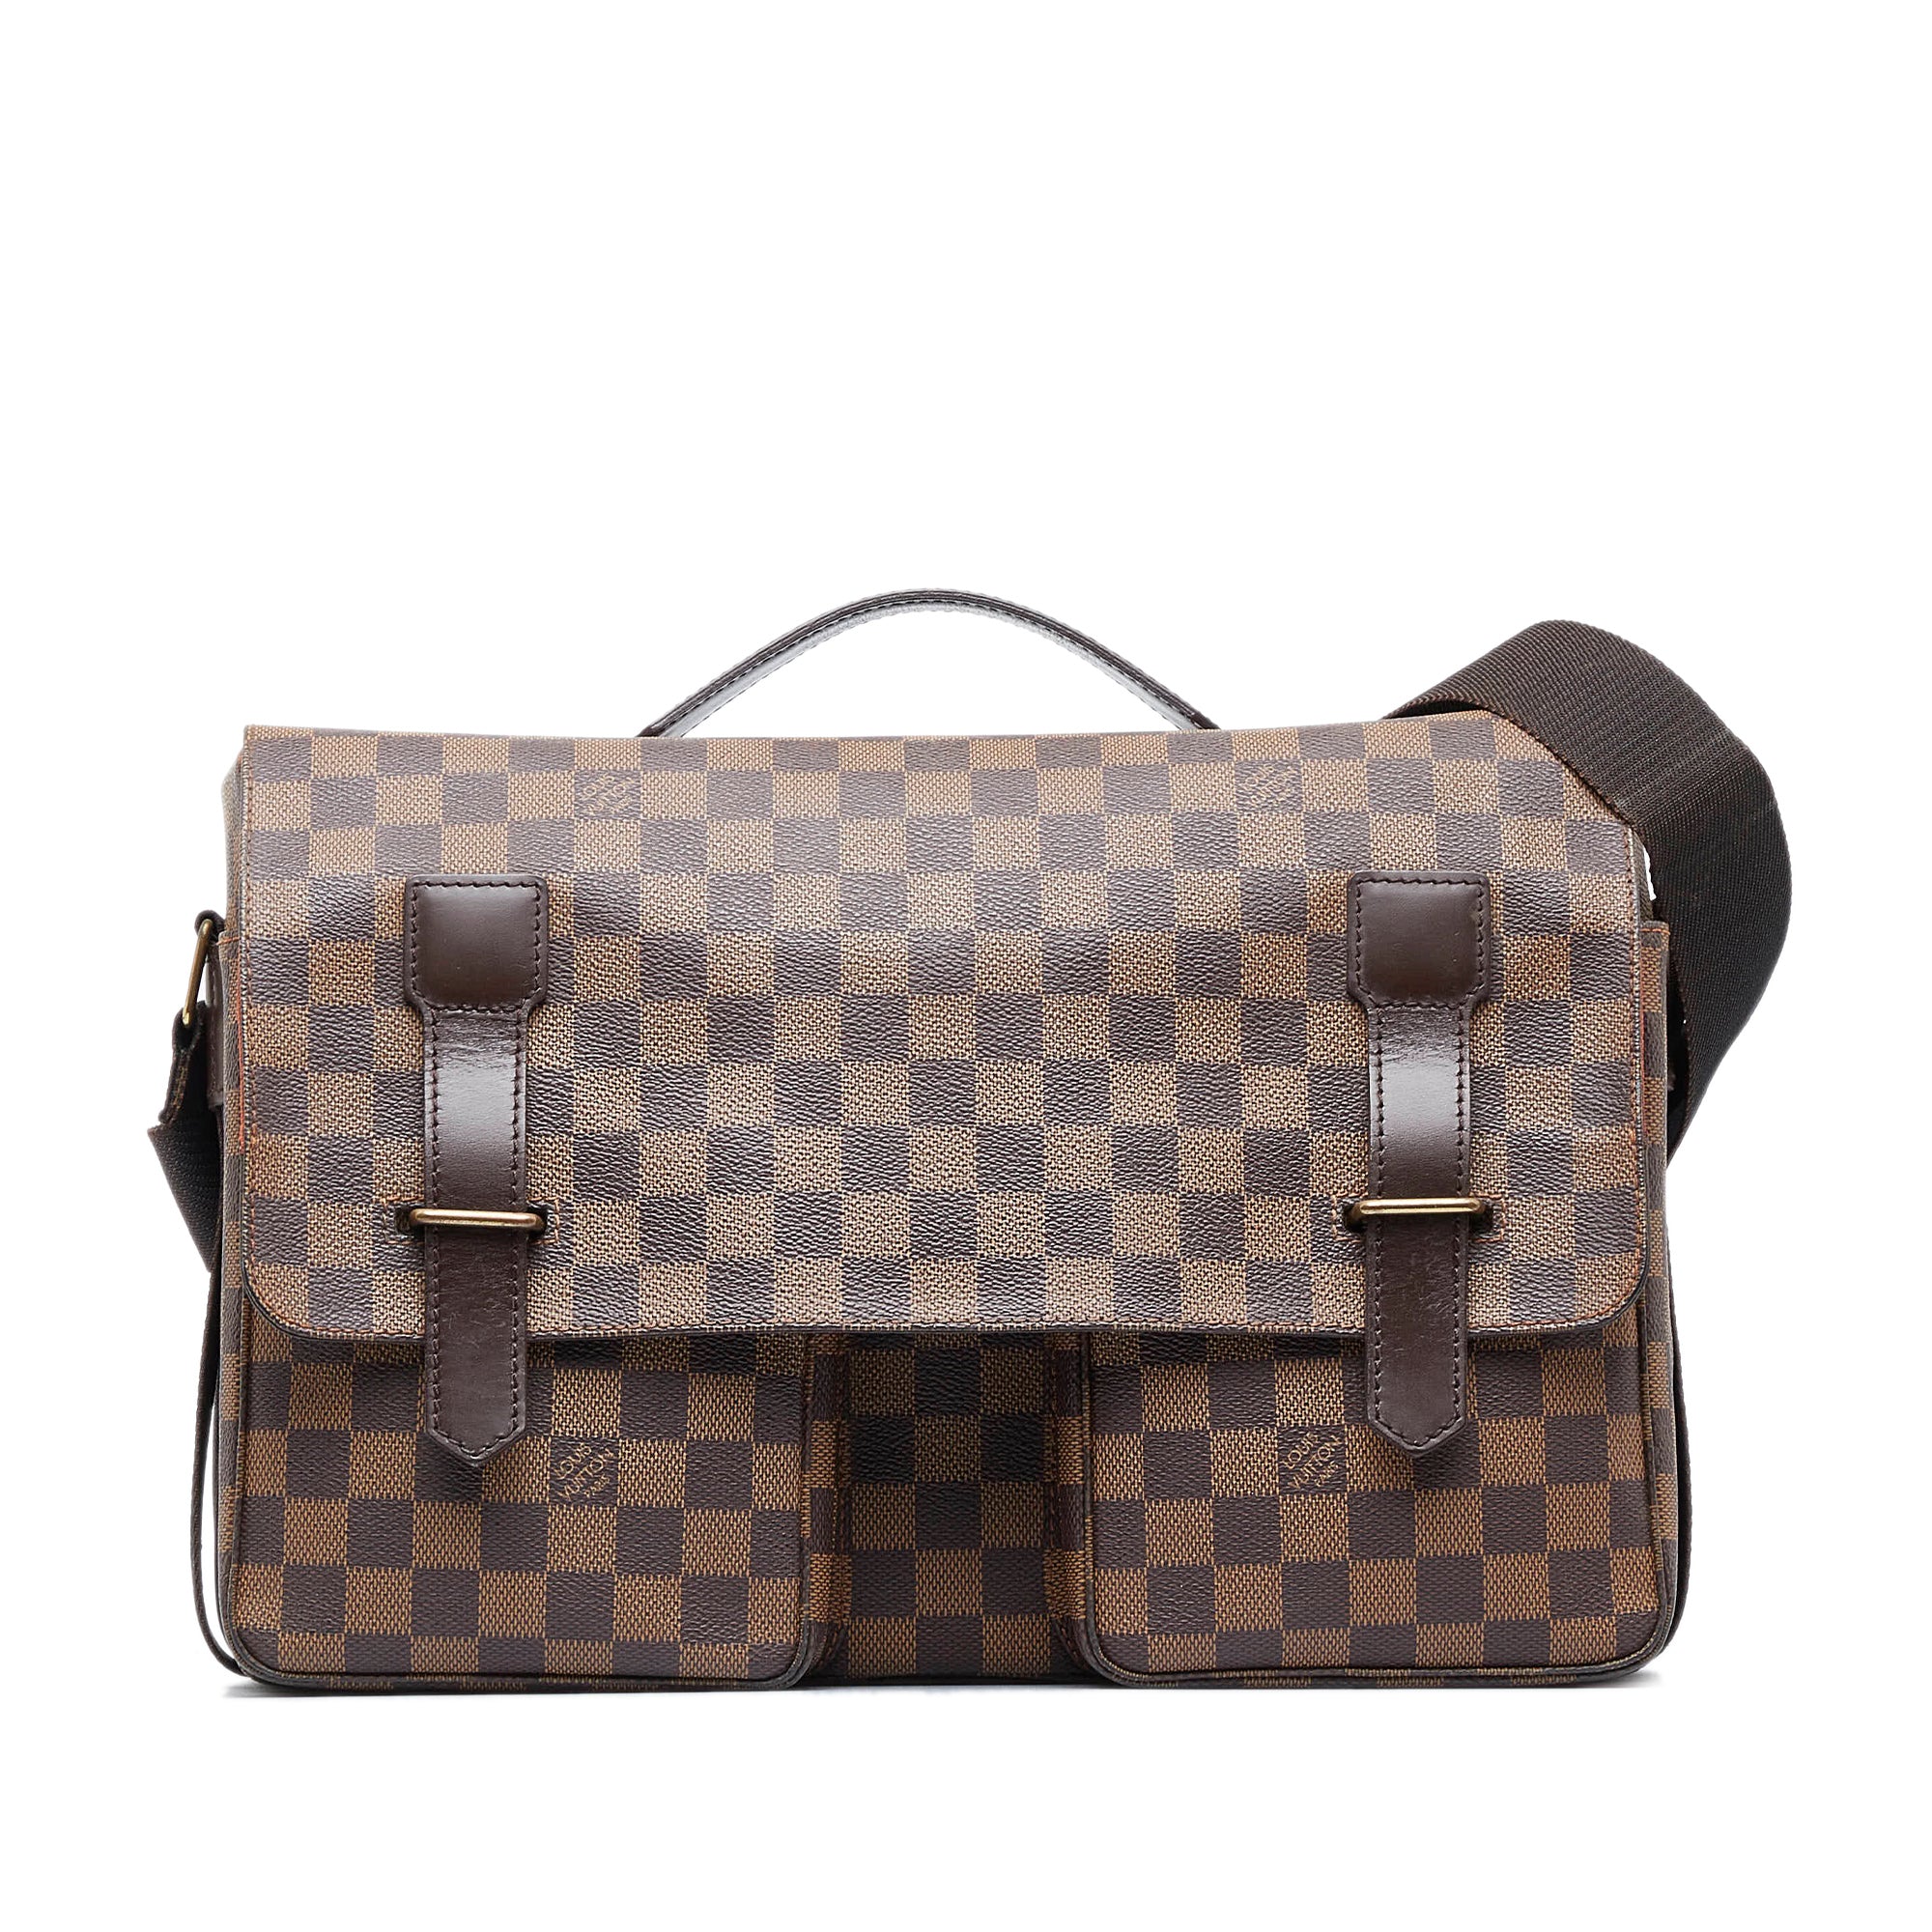 Authenticated Used Louis Vuitton Damier Luggage Brown Damier Canvas 